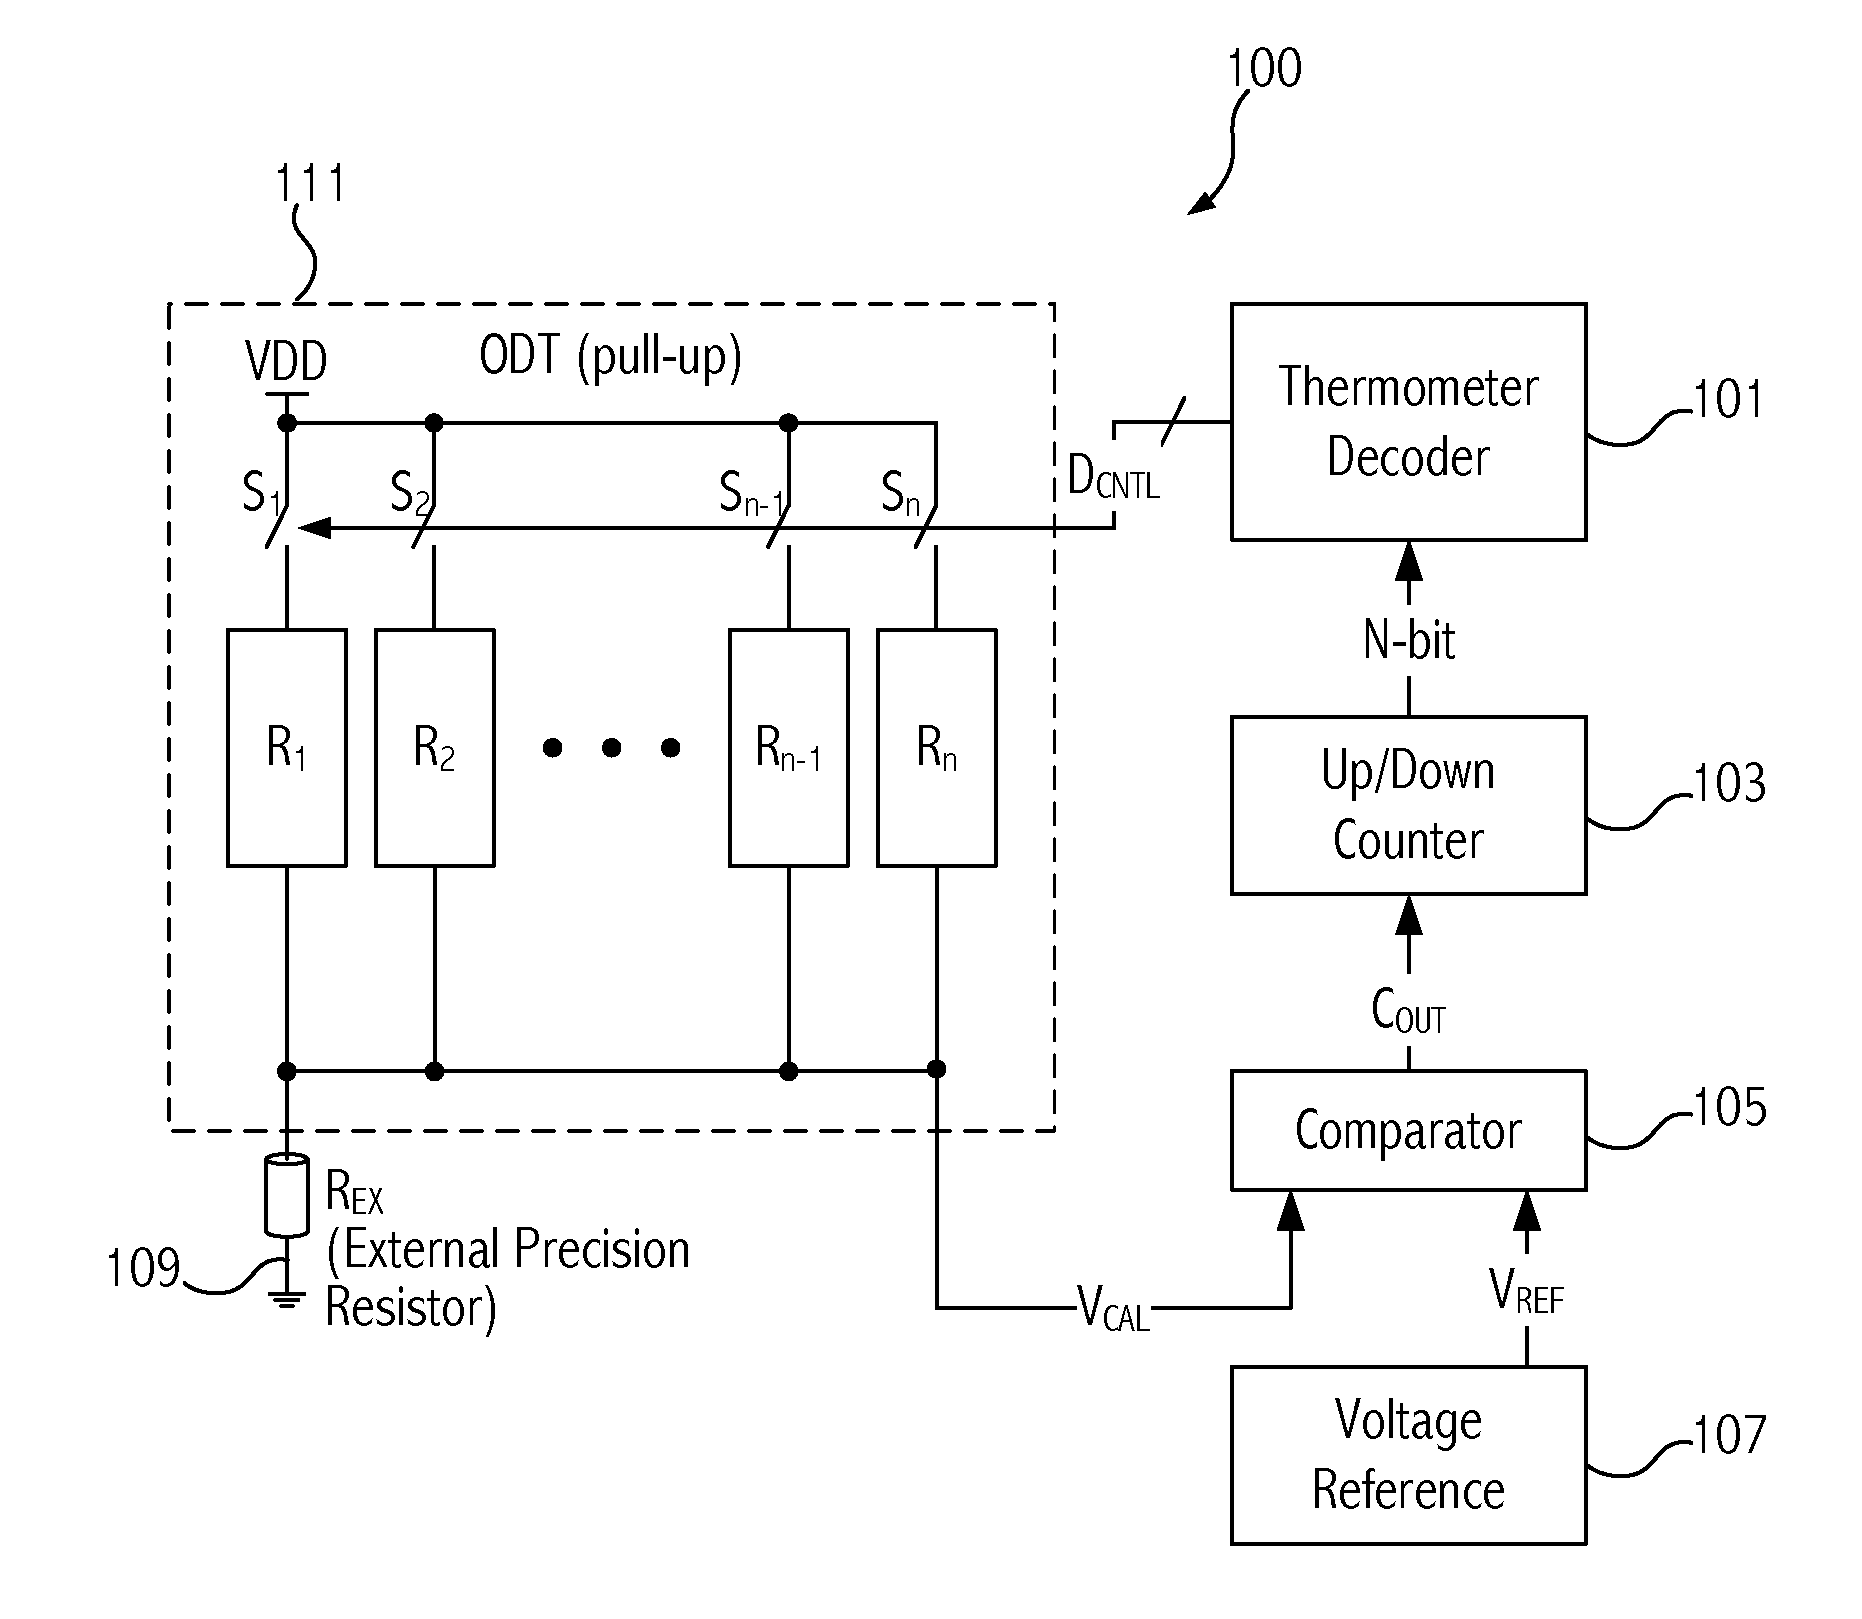 Real time averaged impedance calibration for on-die termination